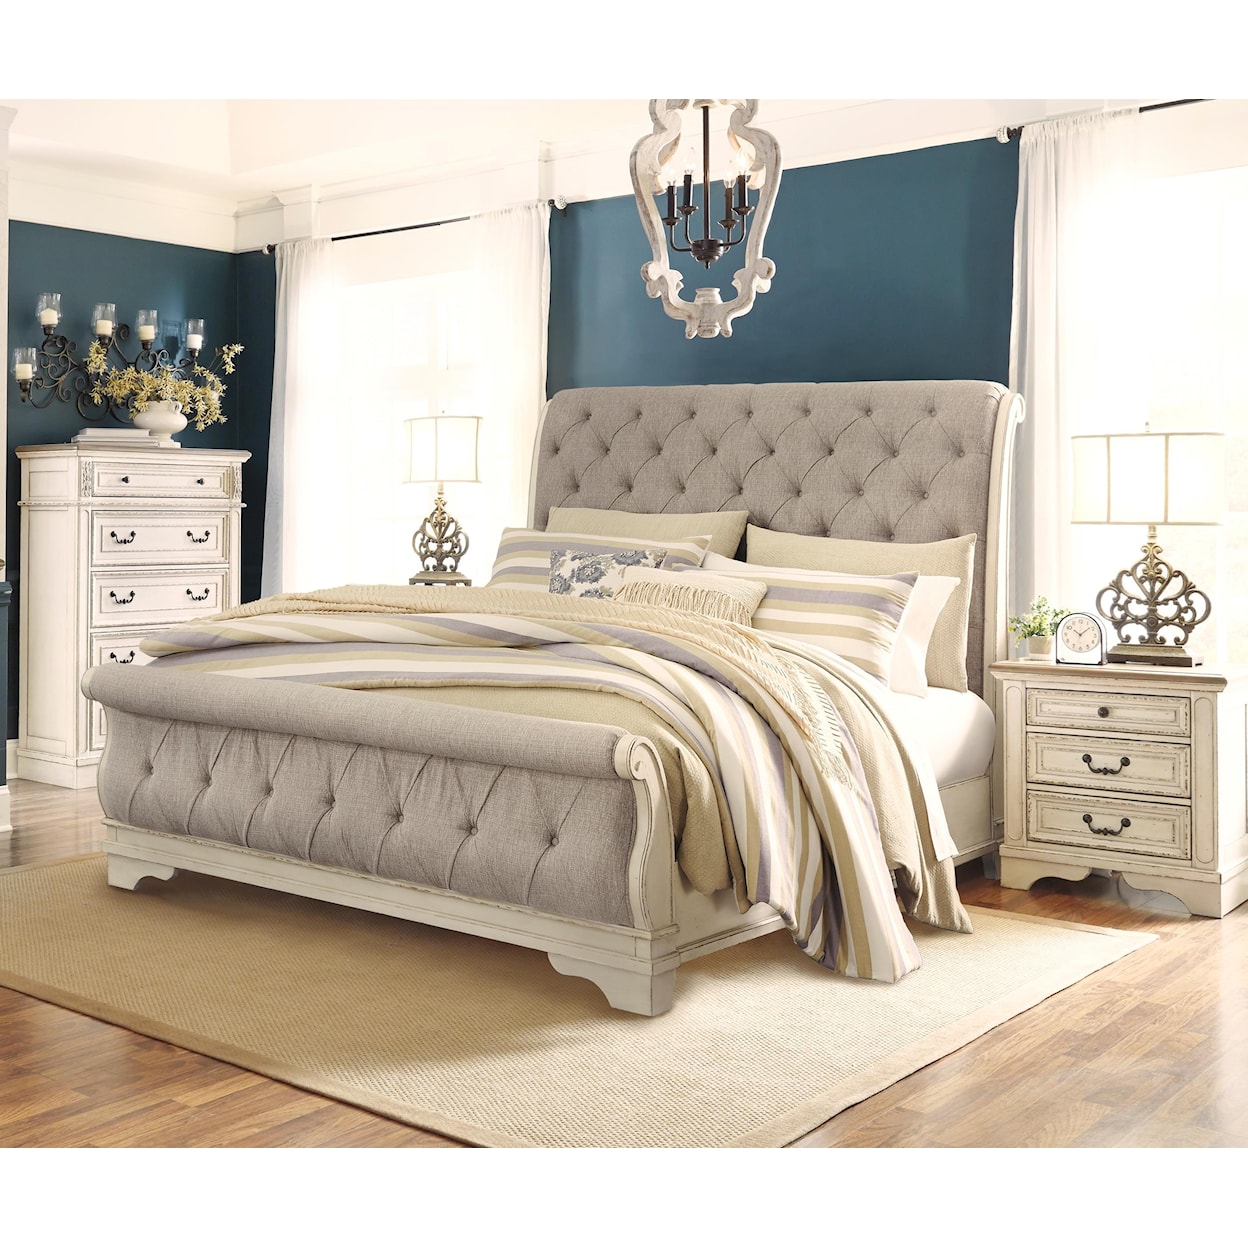 Signature Design by Ashley Realyn 5 Piece King Sleigh Bedroom Set